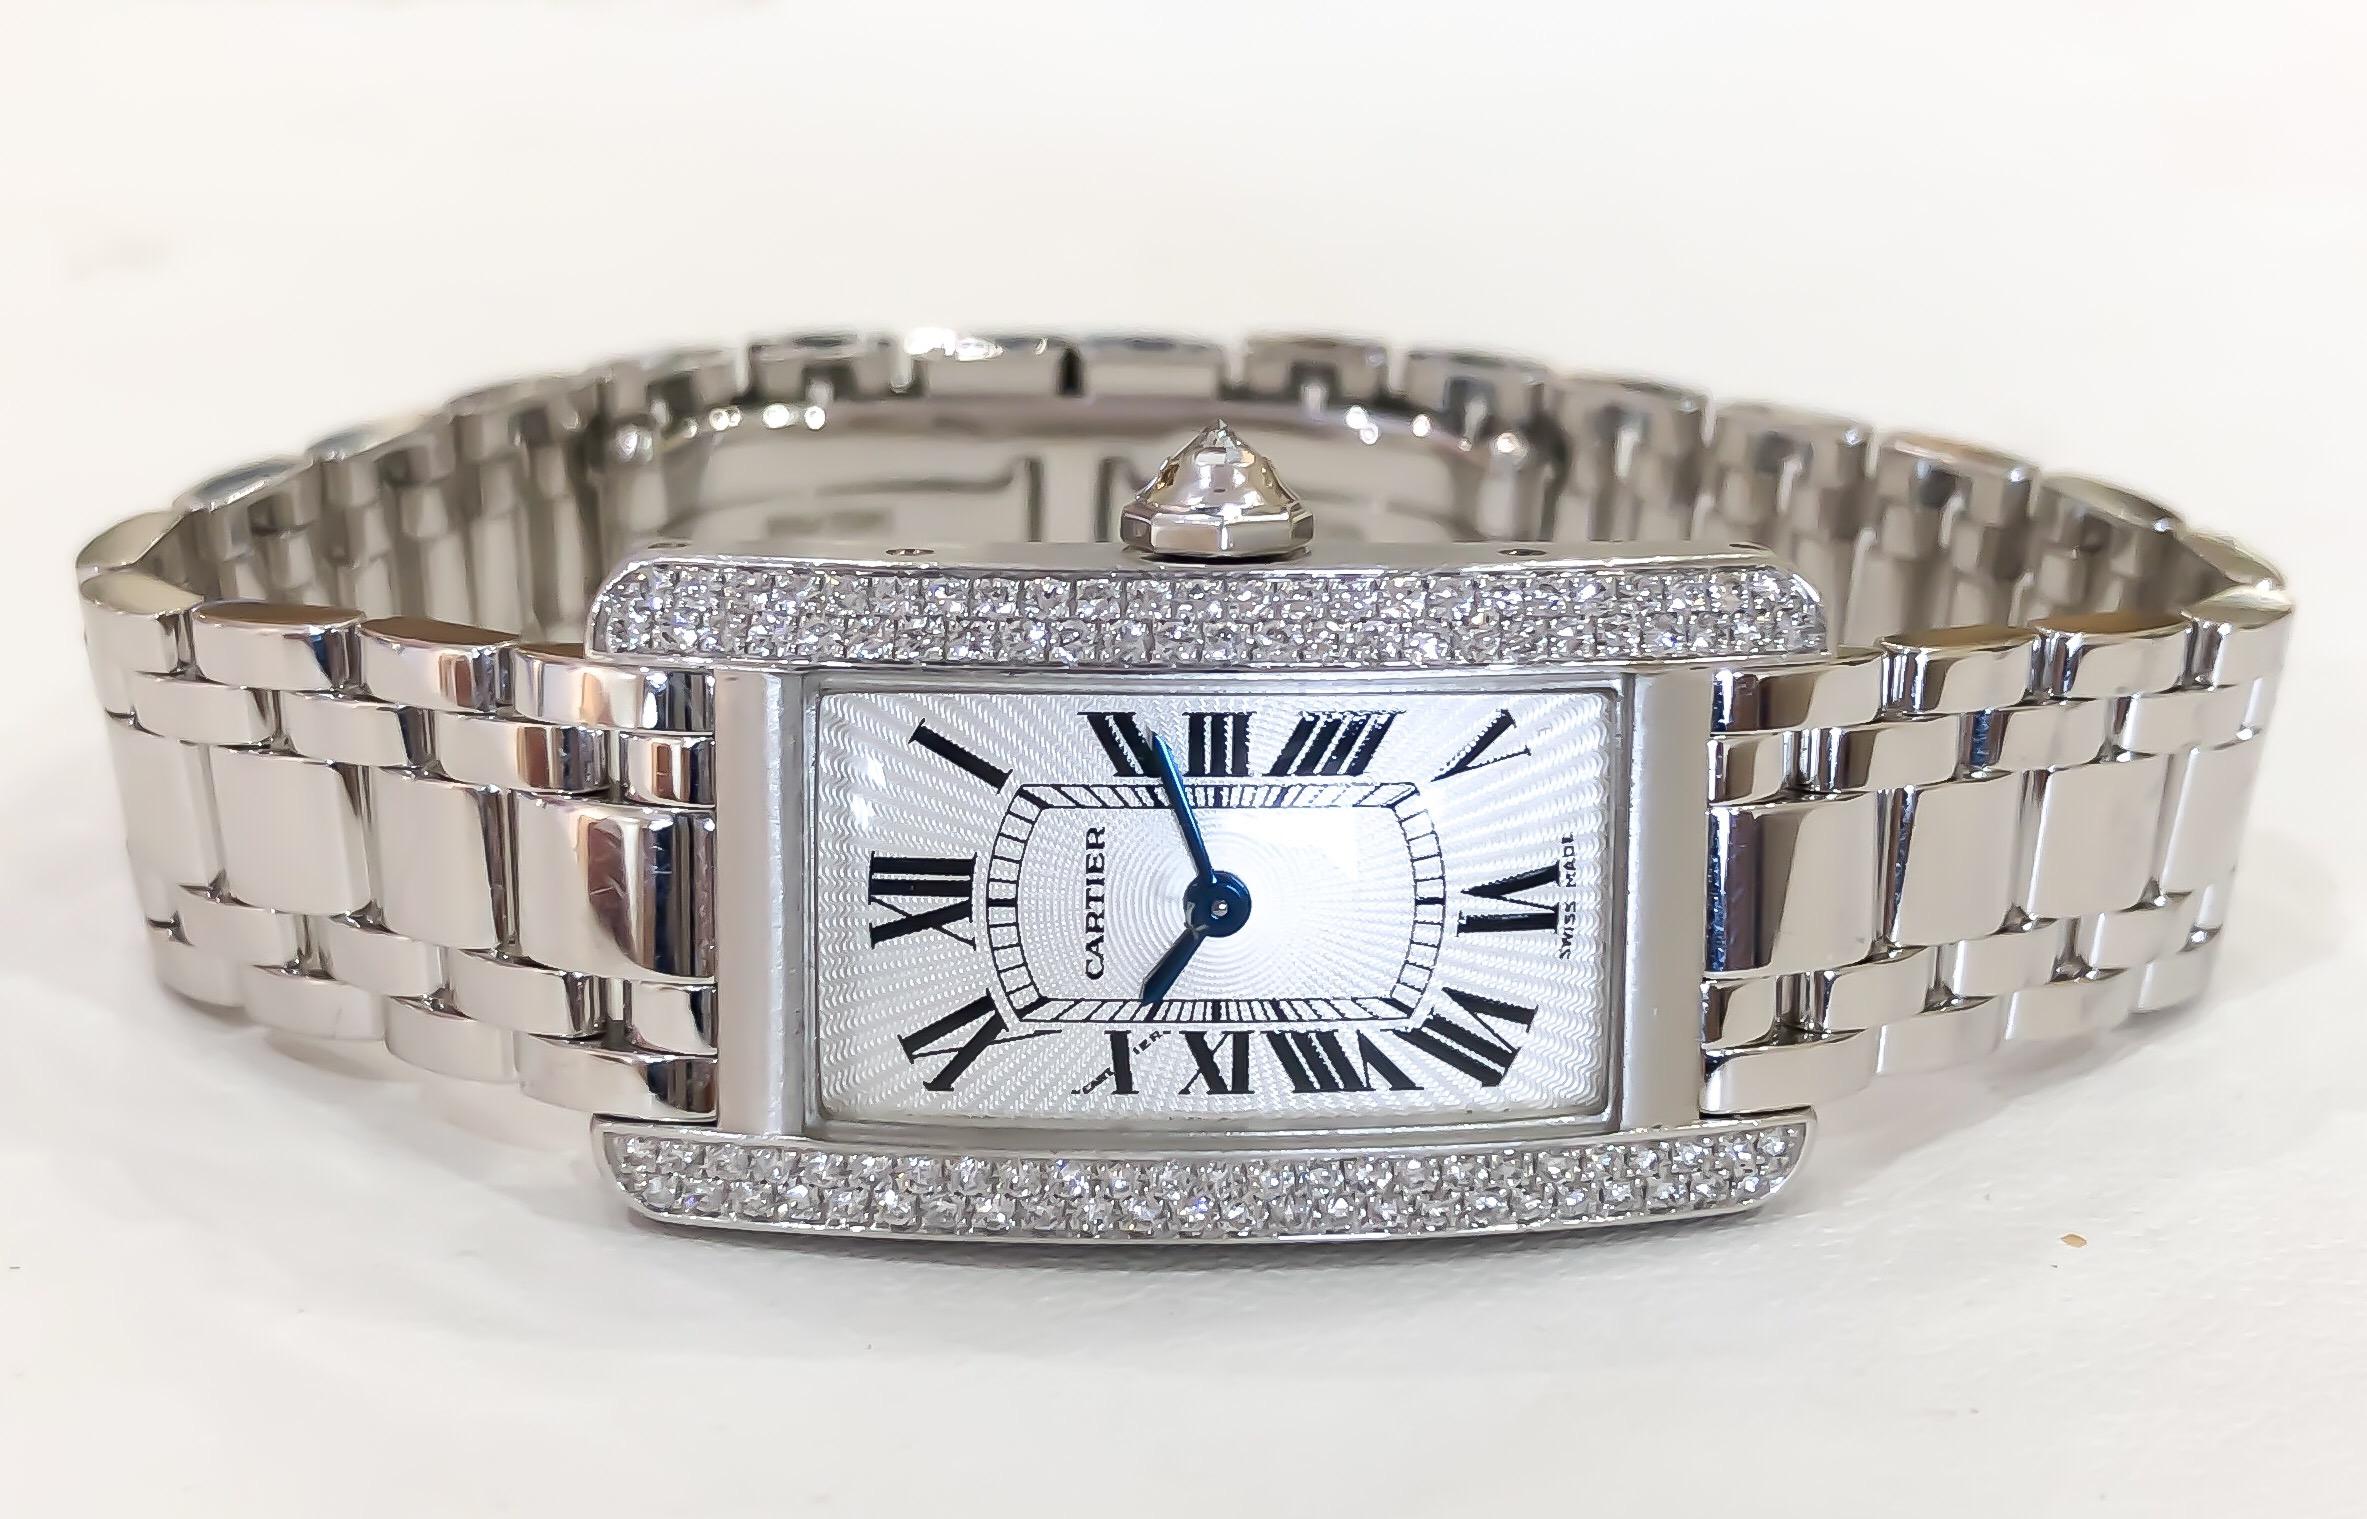 Lady's Cartier Small Americaine Diamond Tank 18K White Gold .85ctw comes with box, papers, extra link. All diamonds are factory set by Cartier.

•REFERENCE NO: 2489
•MOVEMENT: QUARTZ BATTERY
•CASE MATERIAL: SOLID 18 KARAT WHITE GOLD
•CONDITION: LIKE